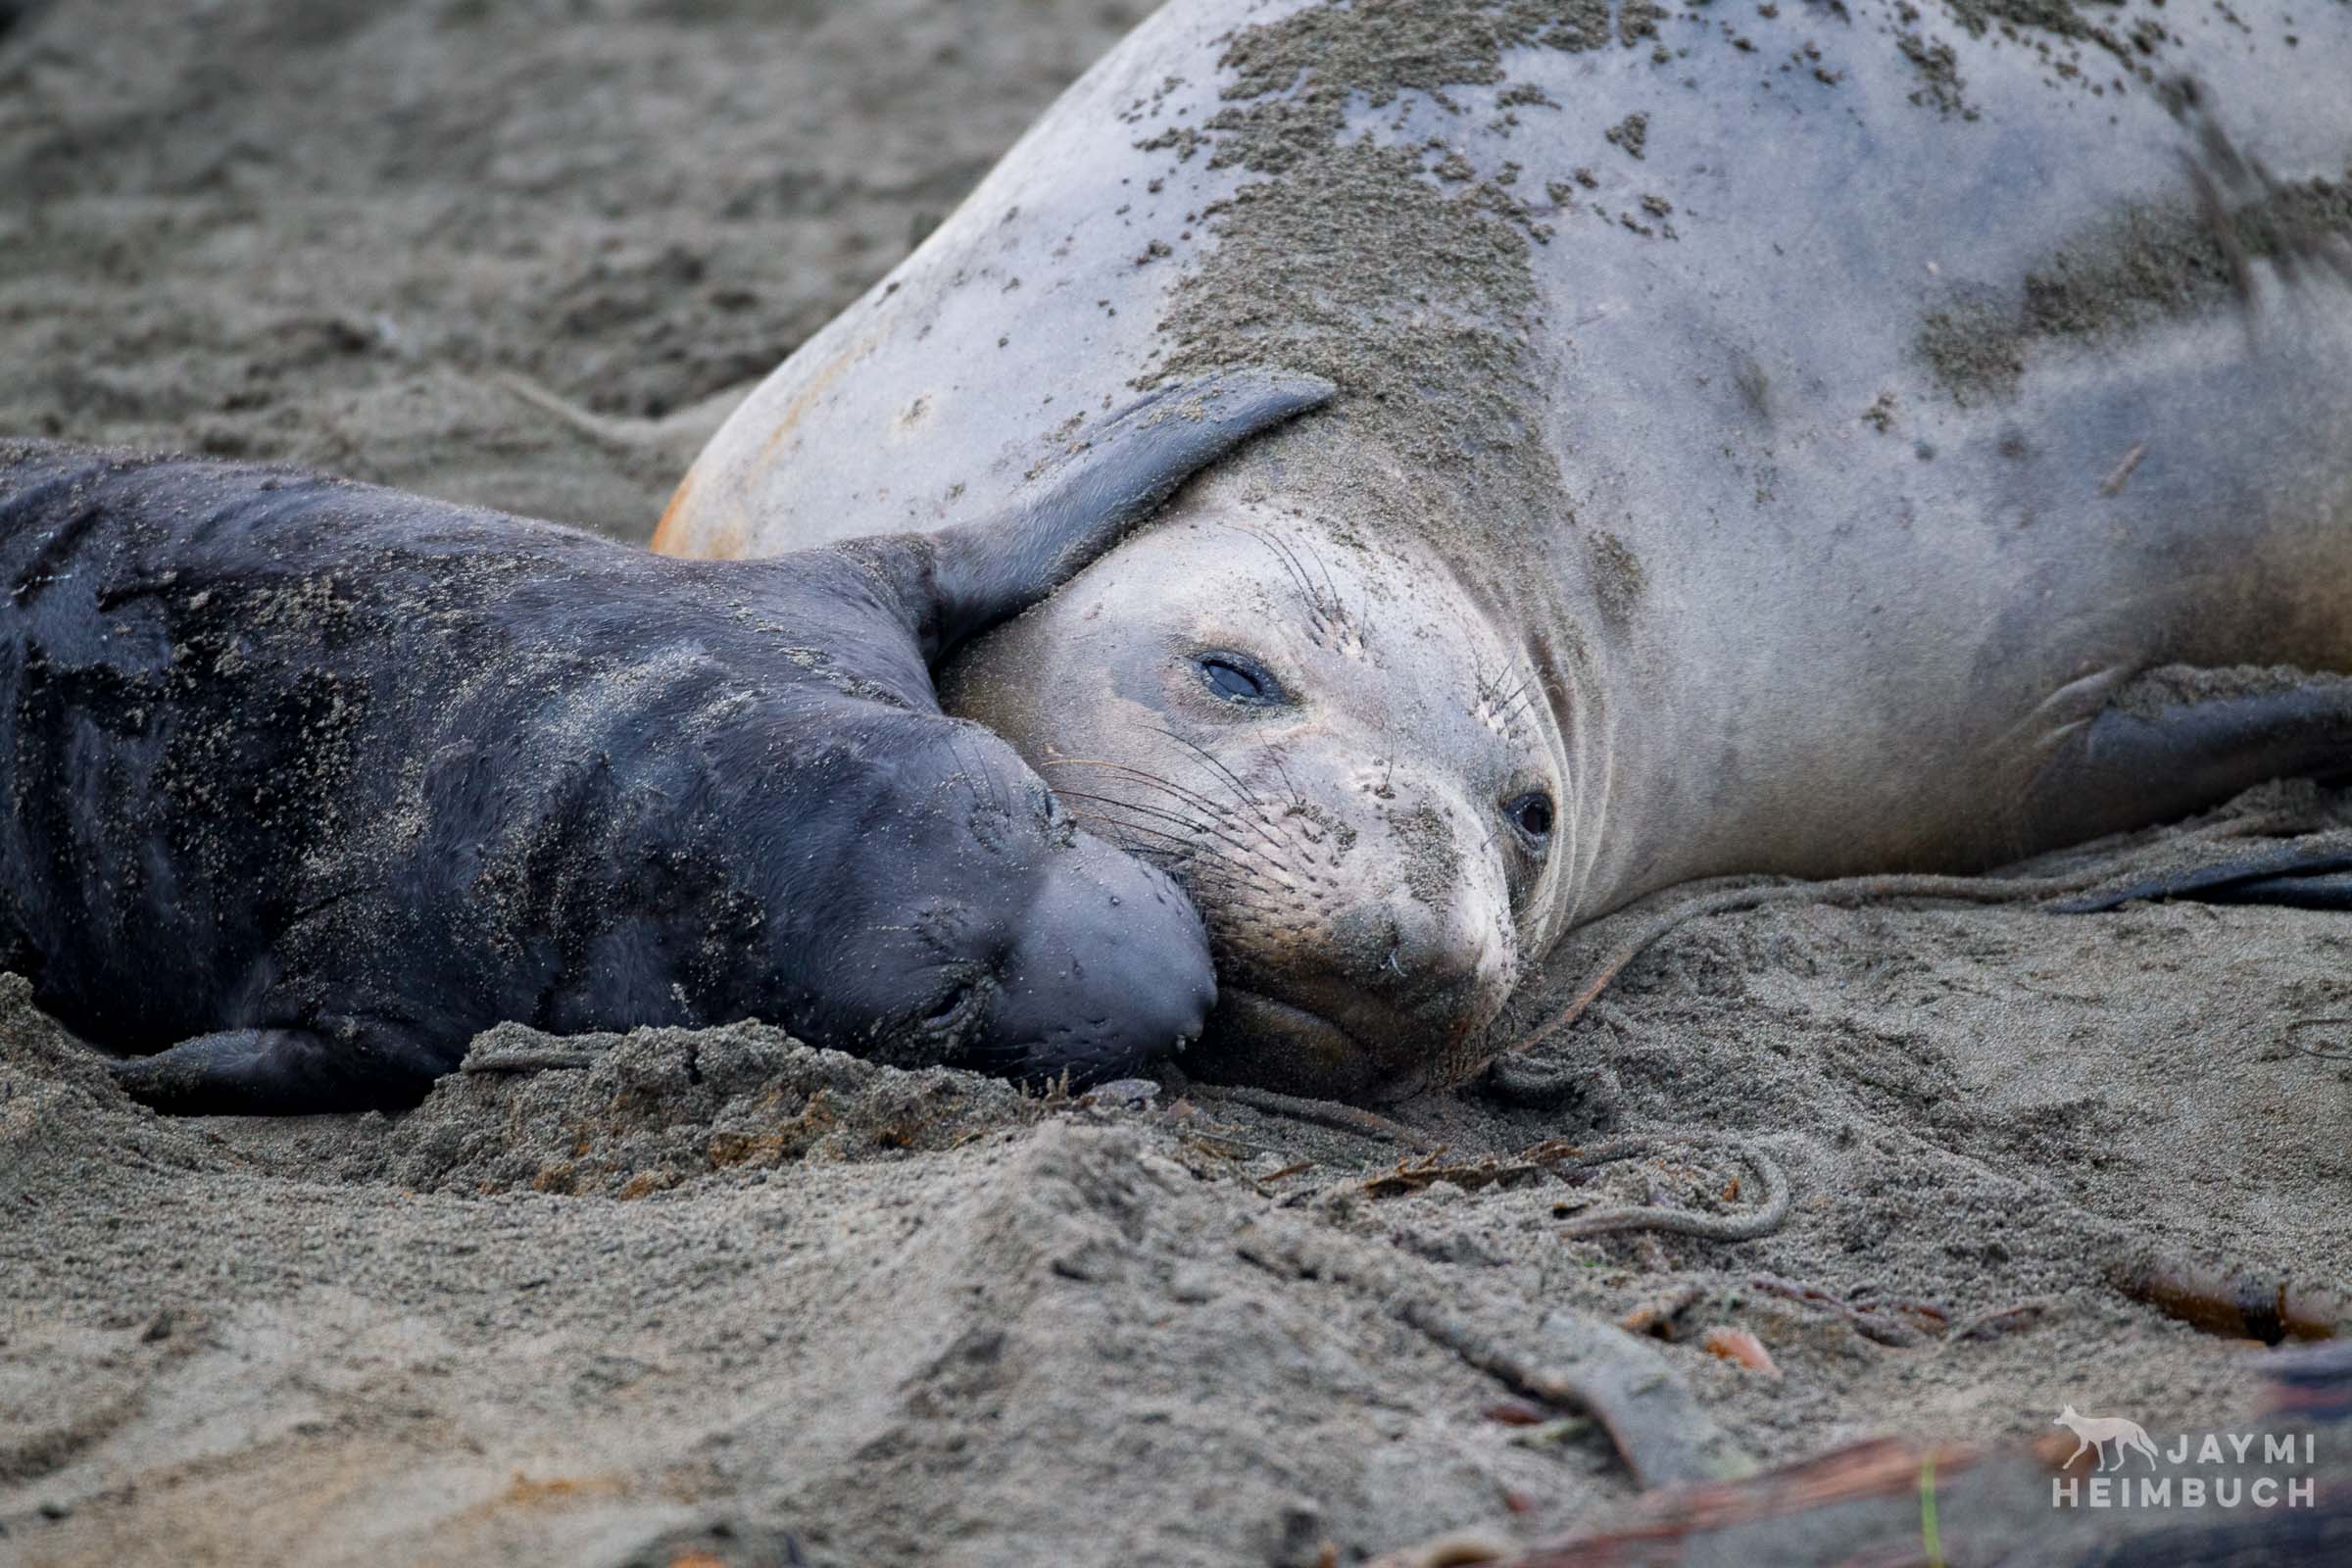 A female northern elephant seal (Mirounga angustirostris) cuddles with her pup on the beach